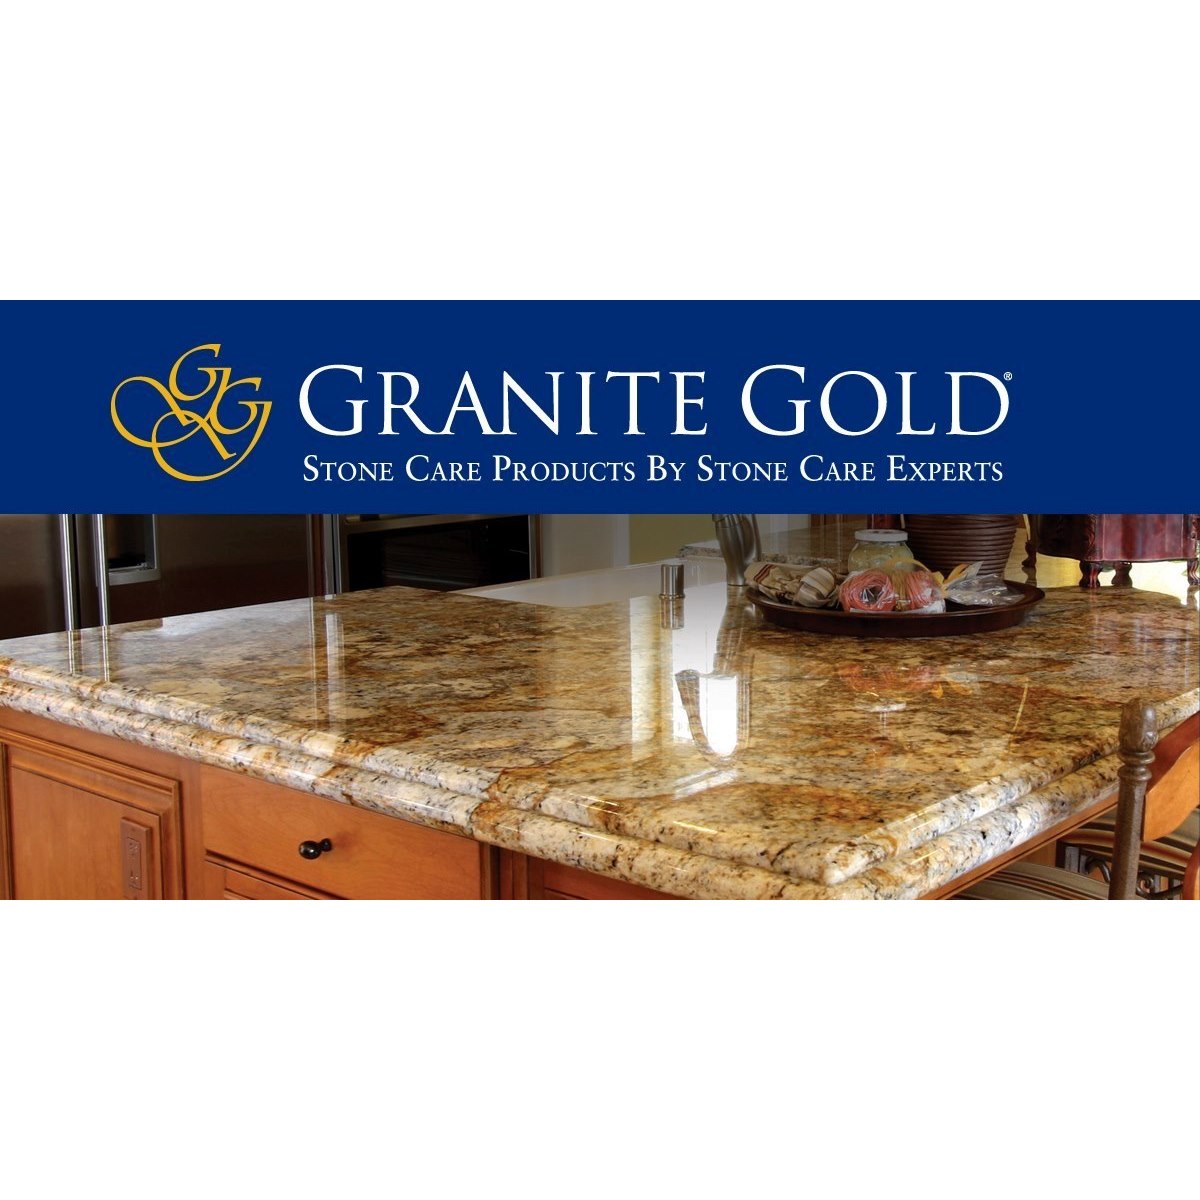 Where to Buy Granite Products